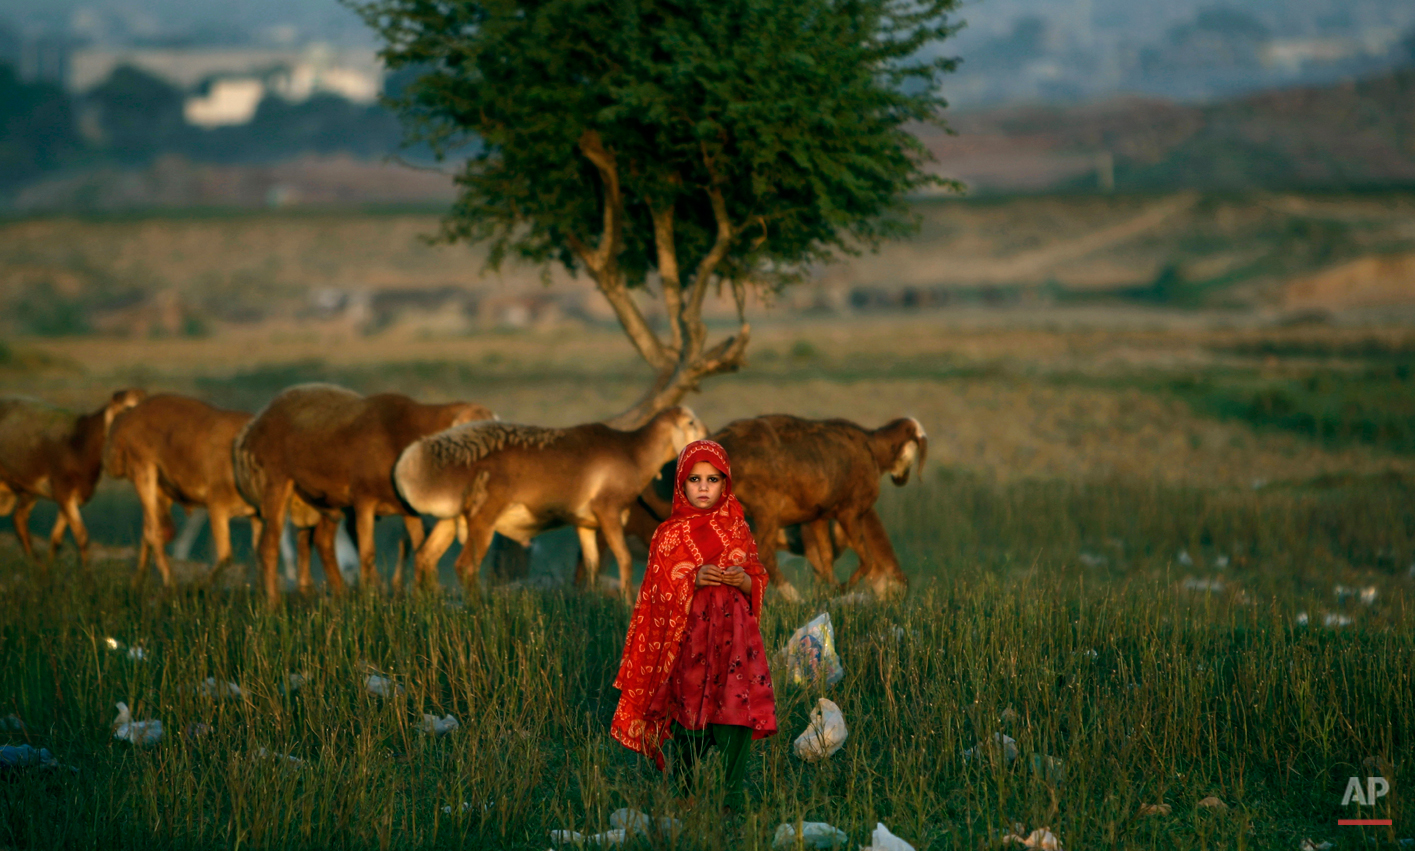  An Afghan refugee girl stands next to her family's sheep in a field next to a slum area on the outskirts of Islamabad, Pakistan, Monday, Oct. 1, 2012. (AP Photo/Muhammed Muheisen) 